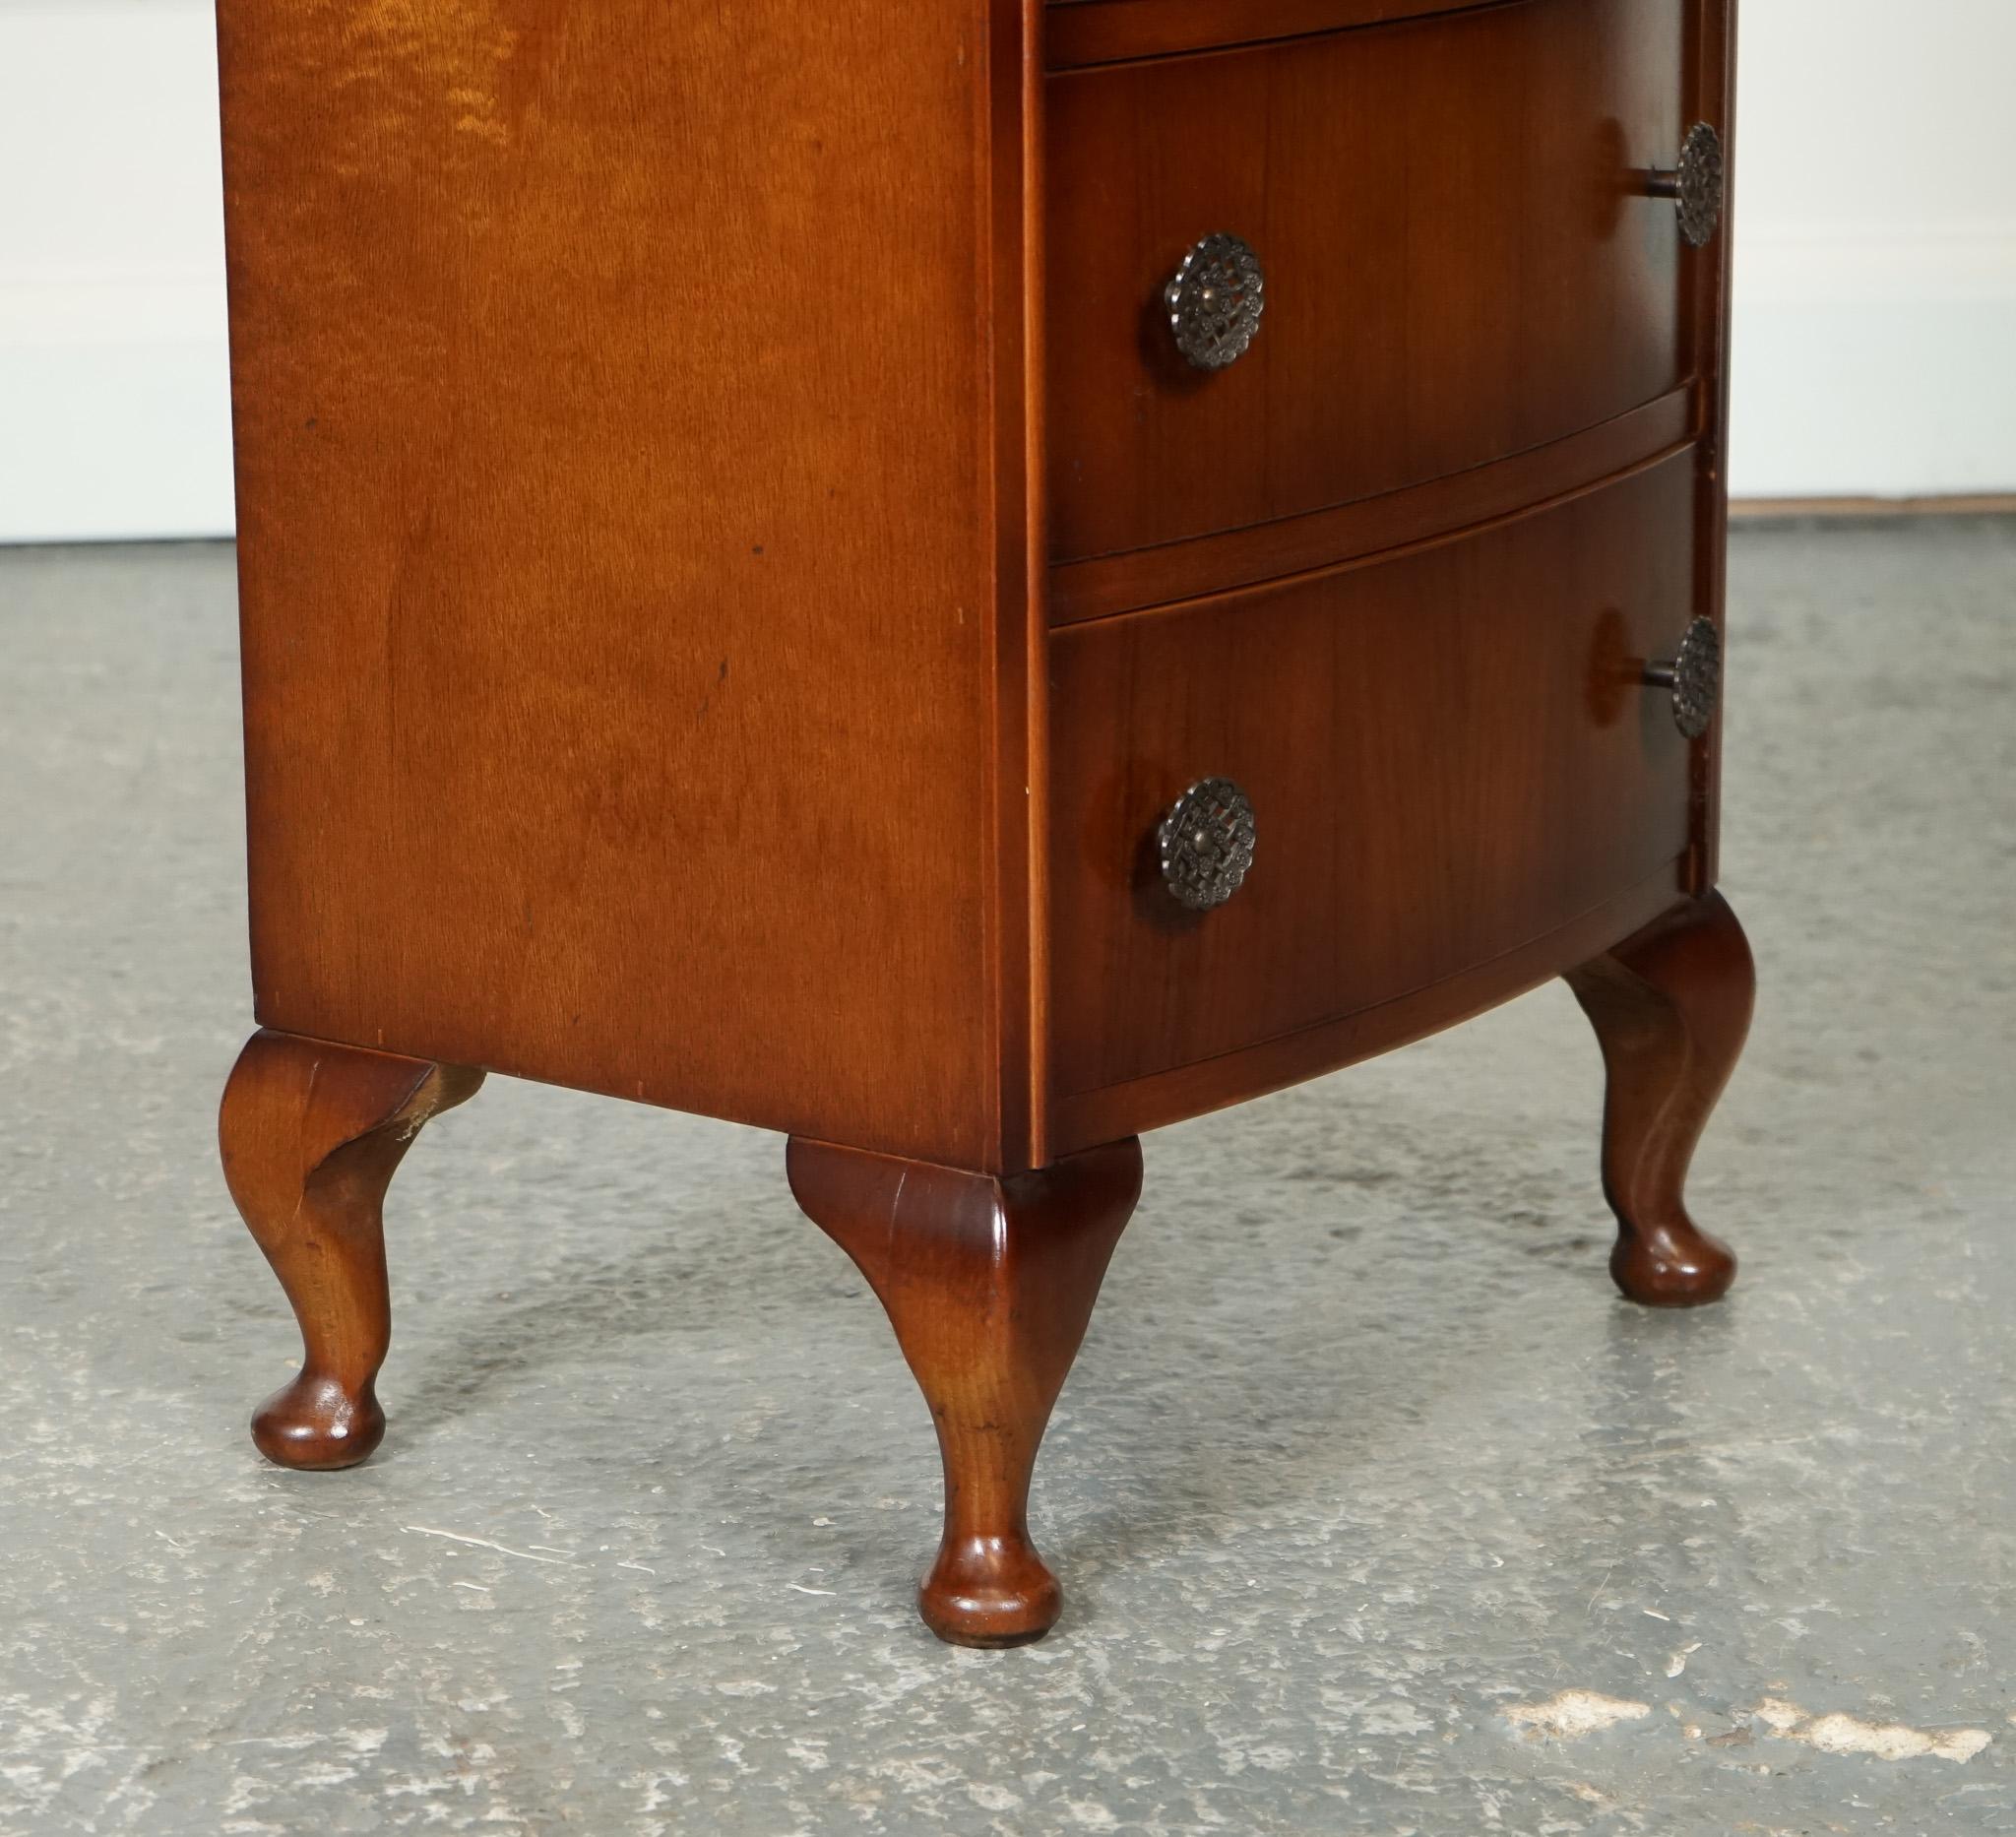 Hardwood ViNTAGE ART DECO BOW FRONTED MAHOGANY TALL BOY CHEST F DRAWERS QUEEN ANN LEGS J1